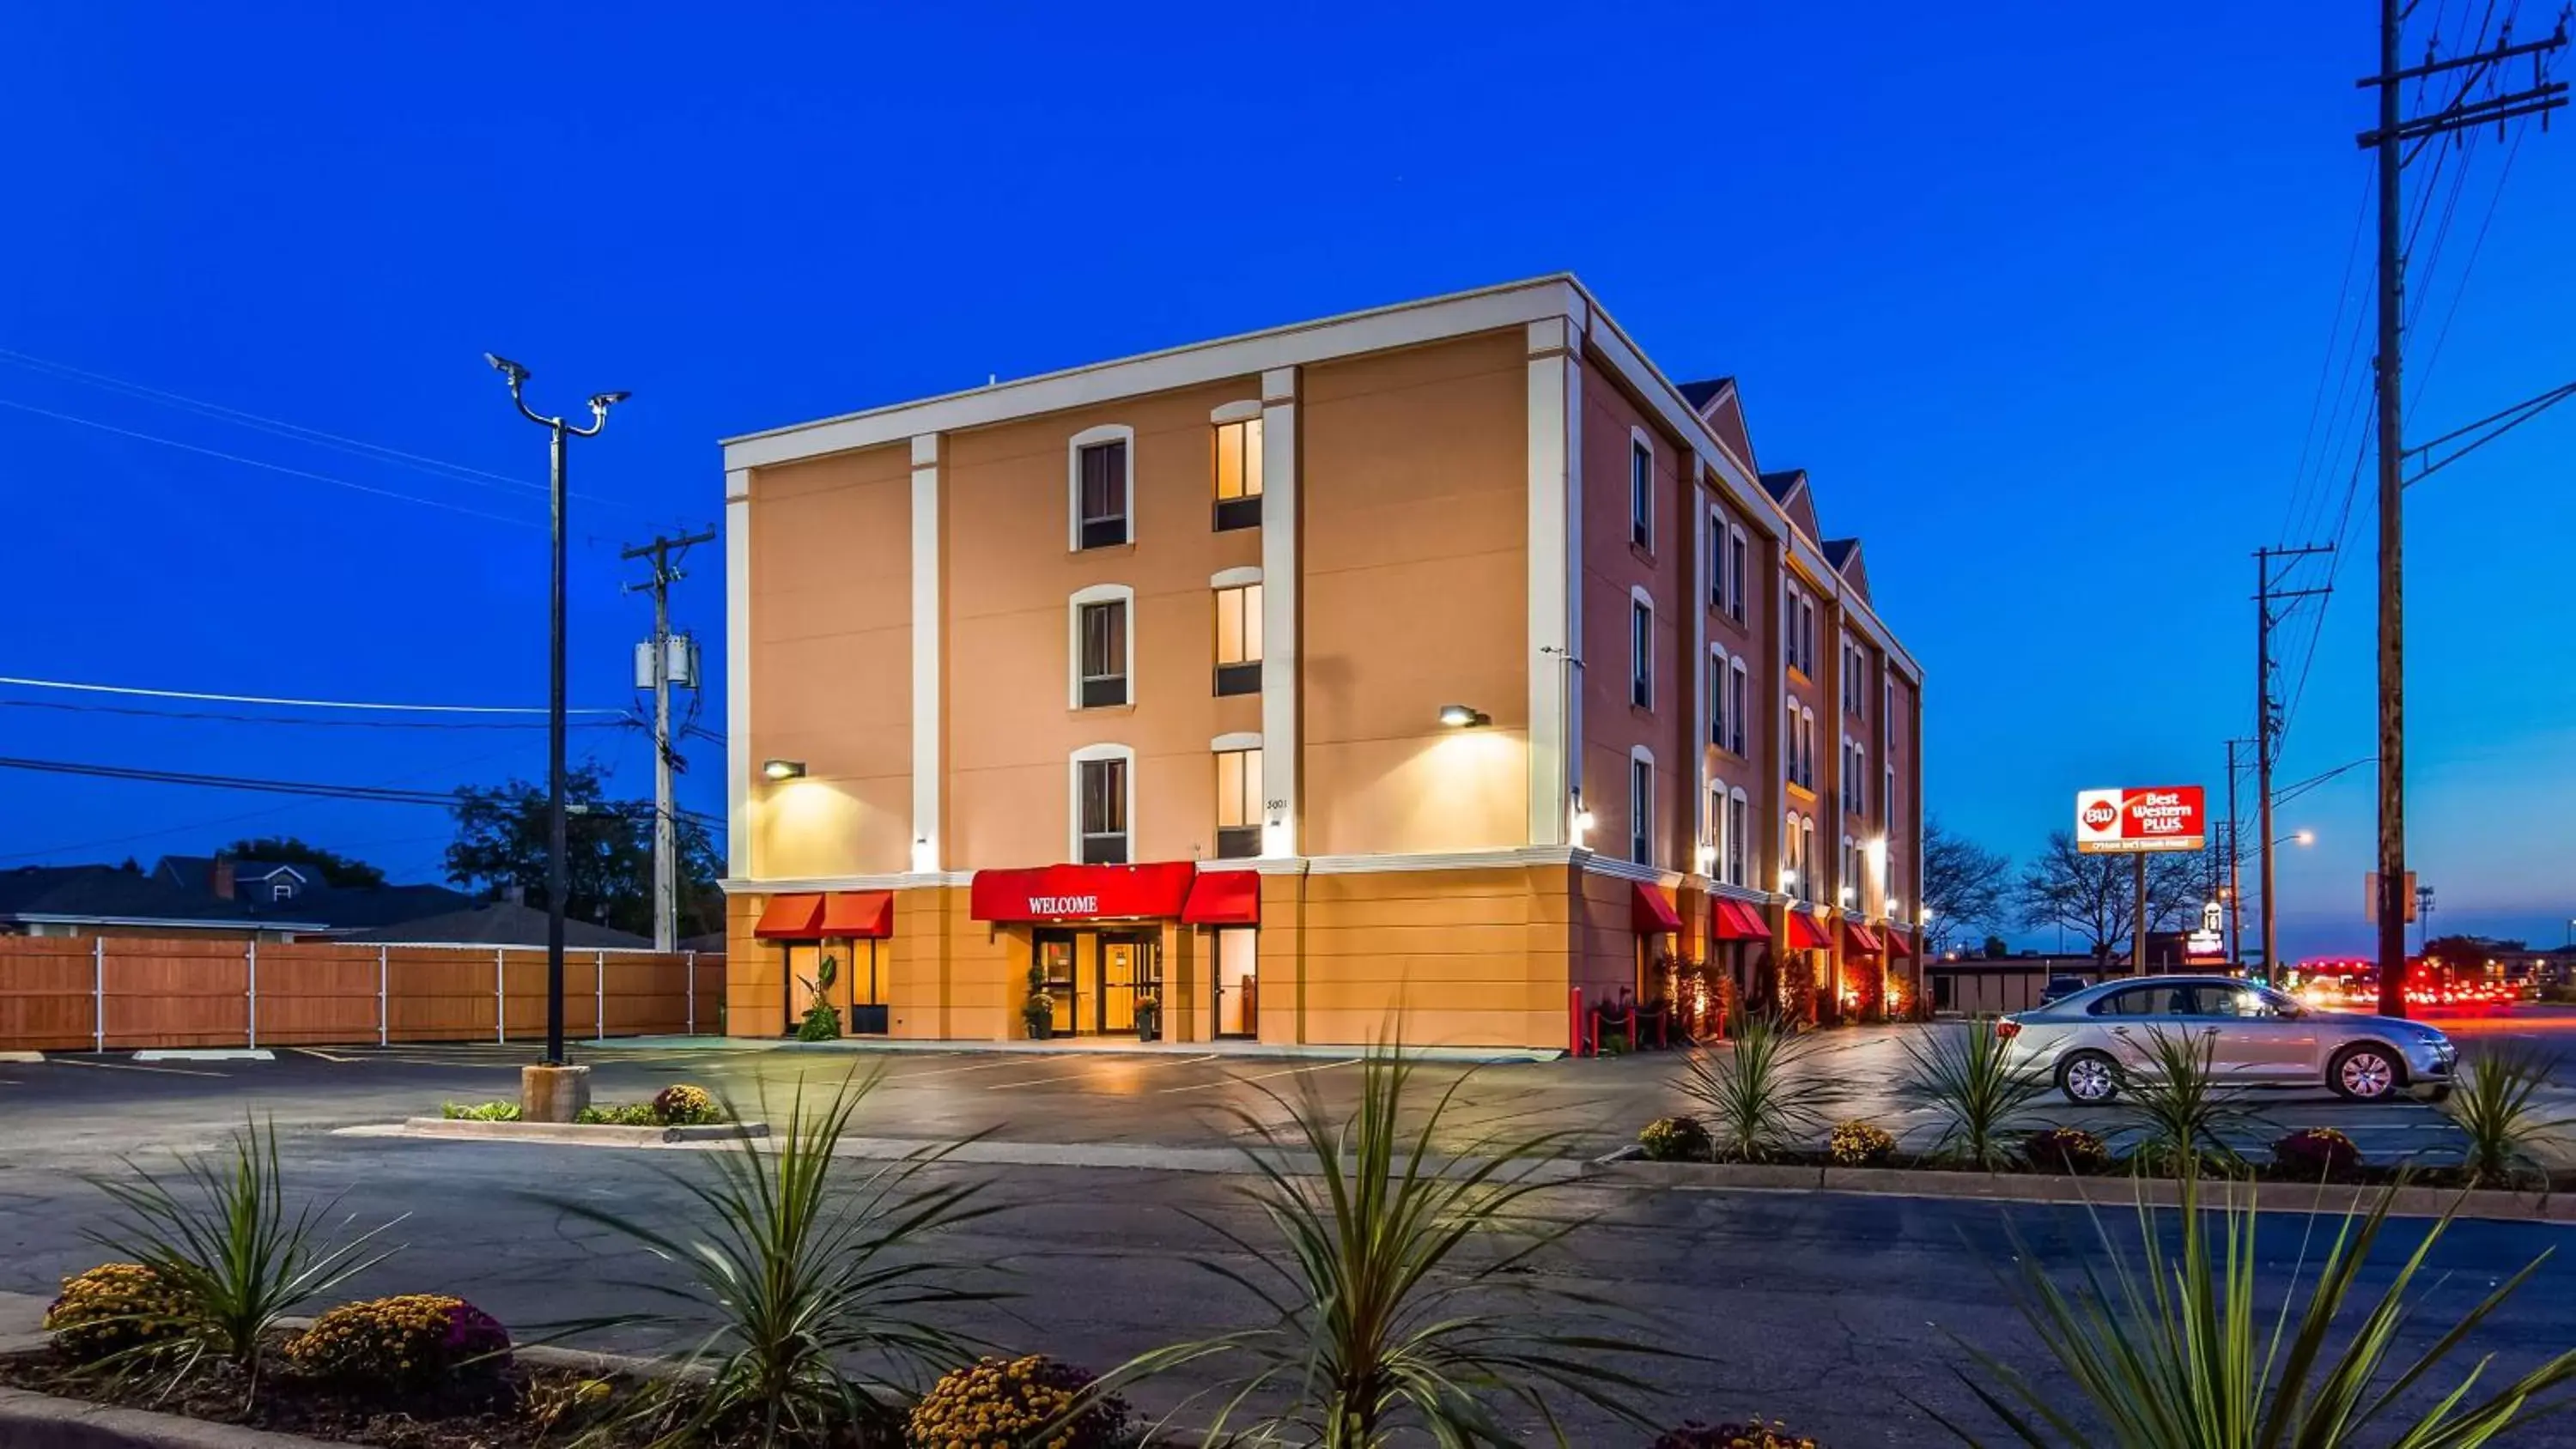 Property Building in Best Western Plus O'hare International South Hotel